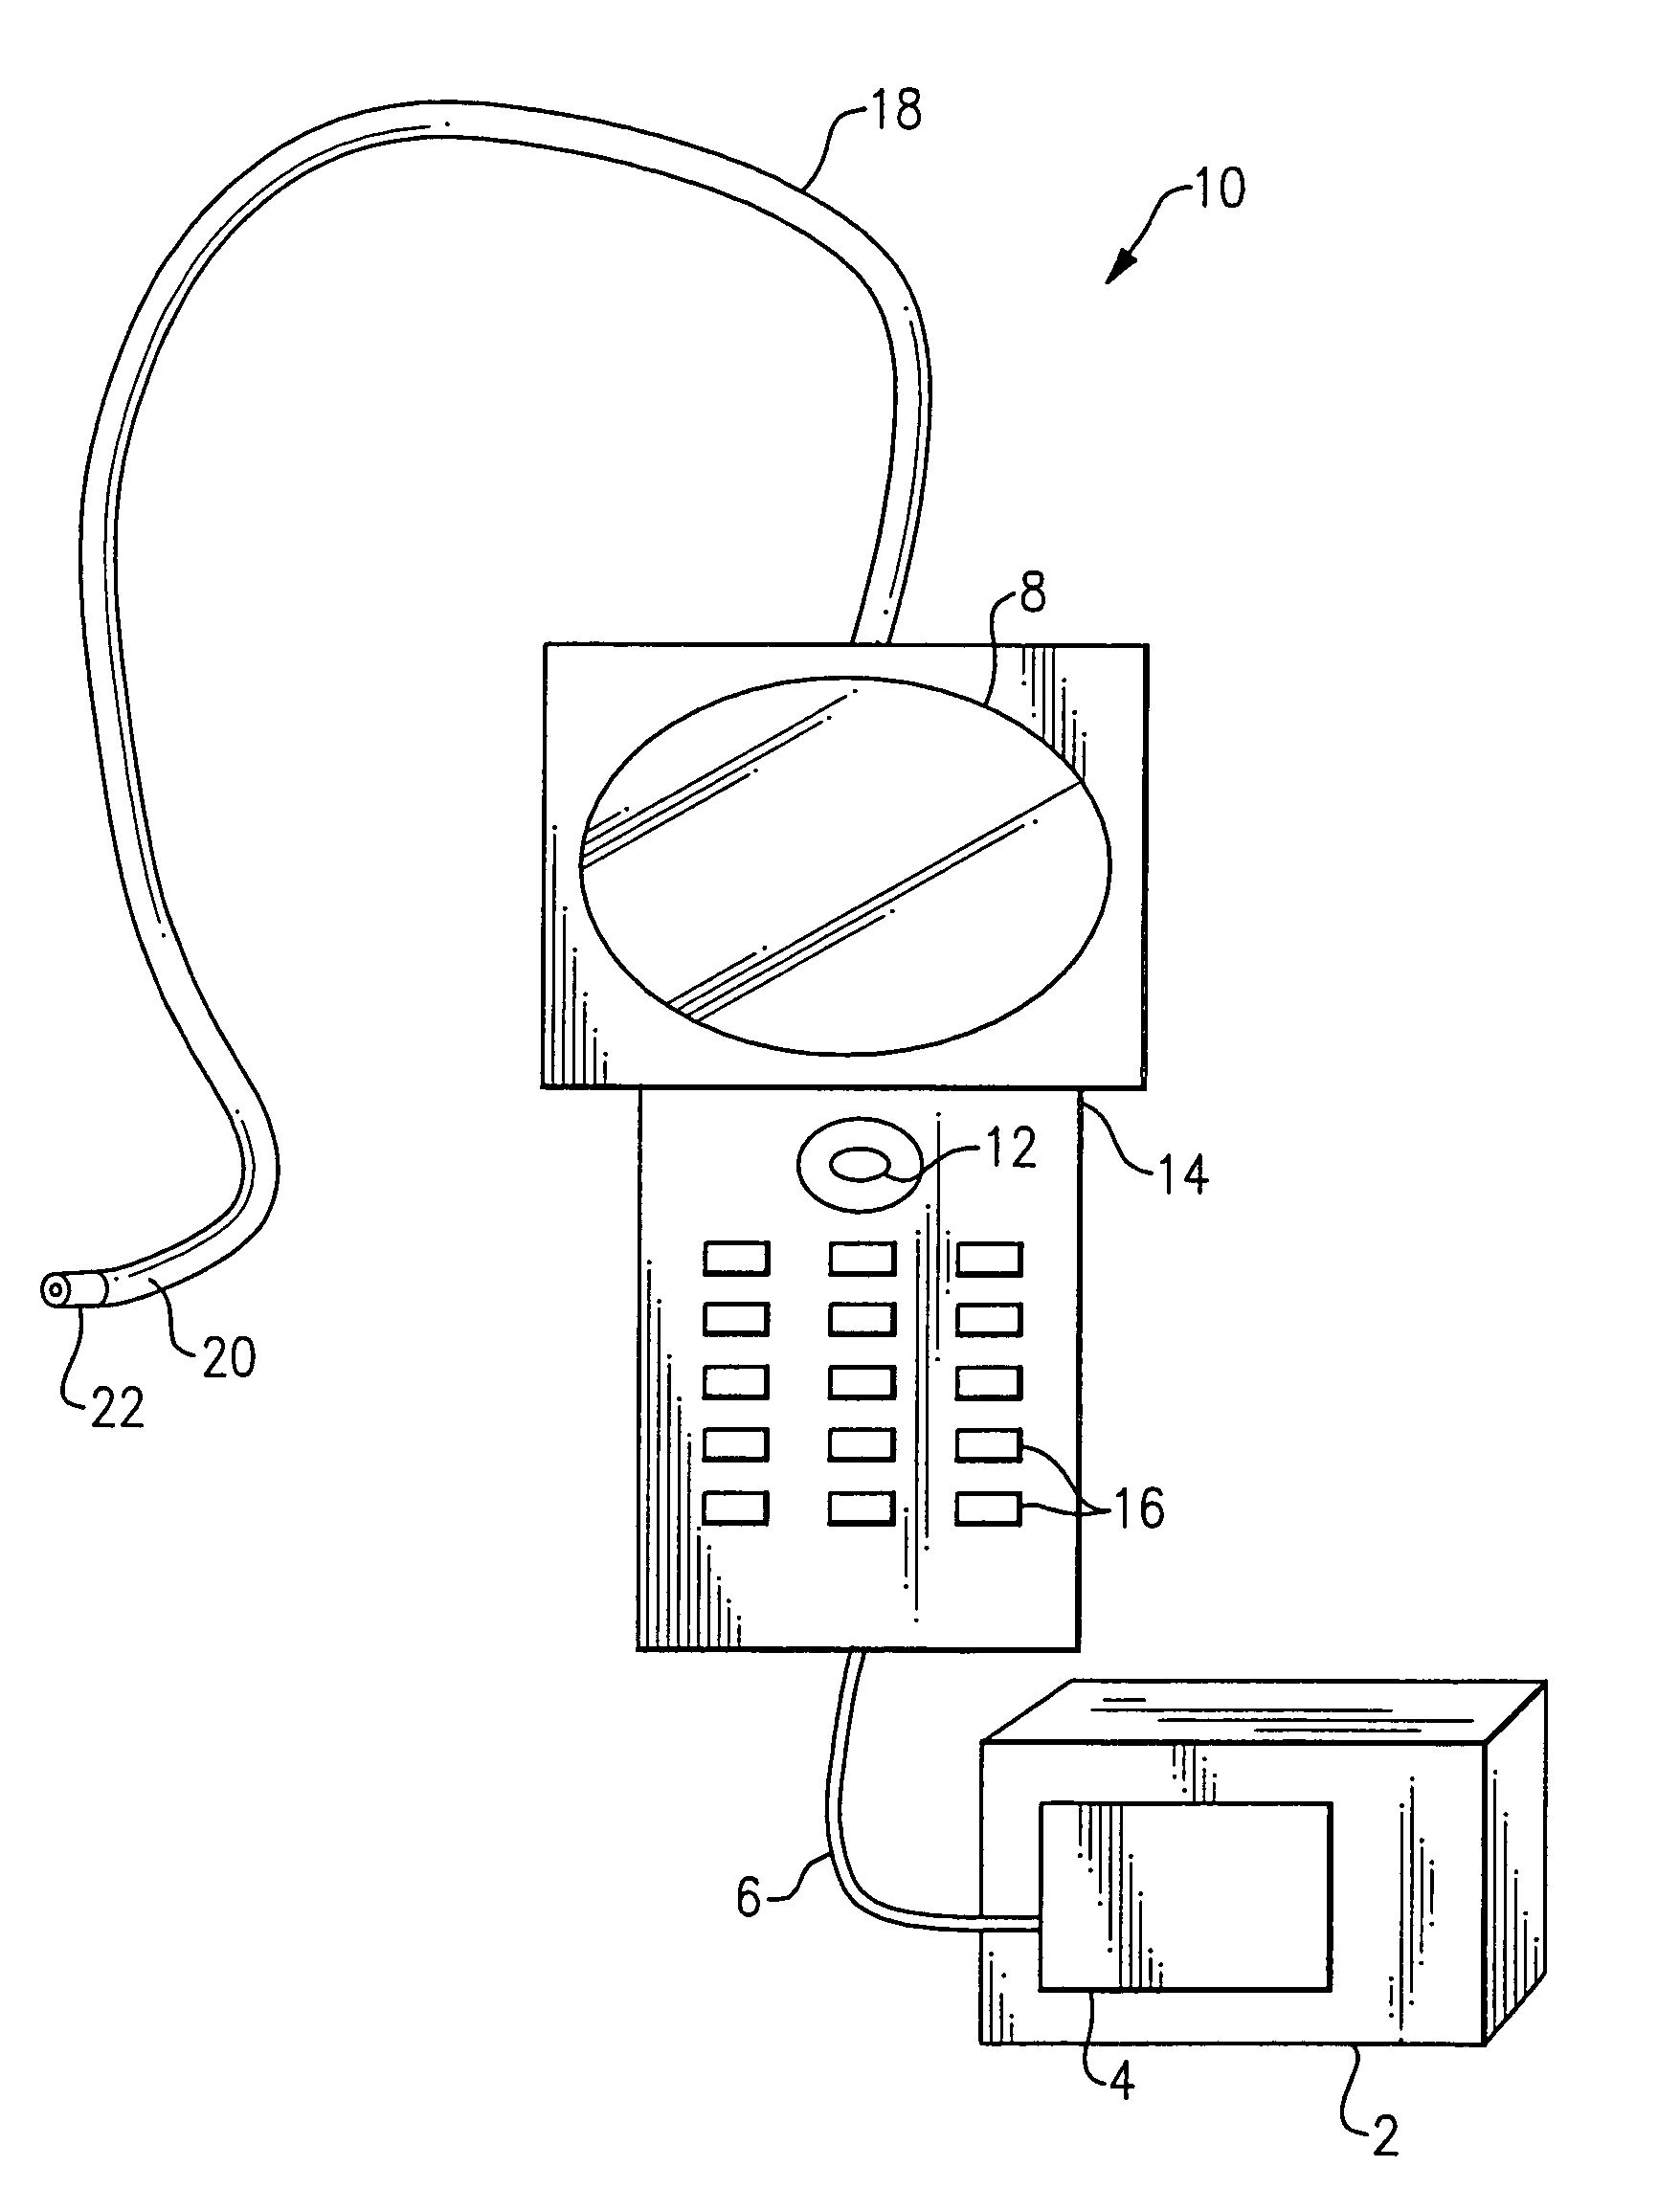 Method and apparatus for improving the operation of a remote viewing device by changing the calibration settings of its articulation servos